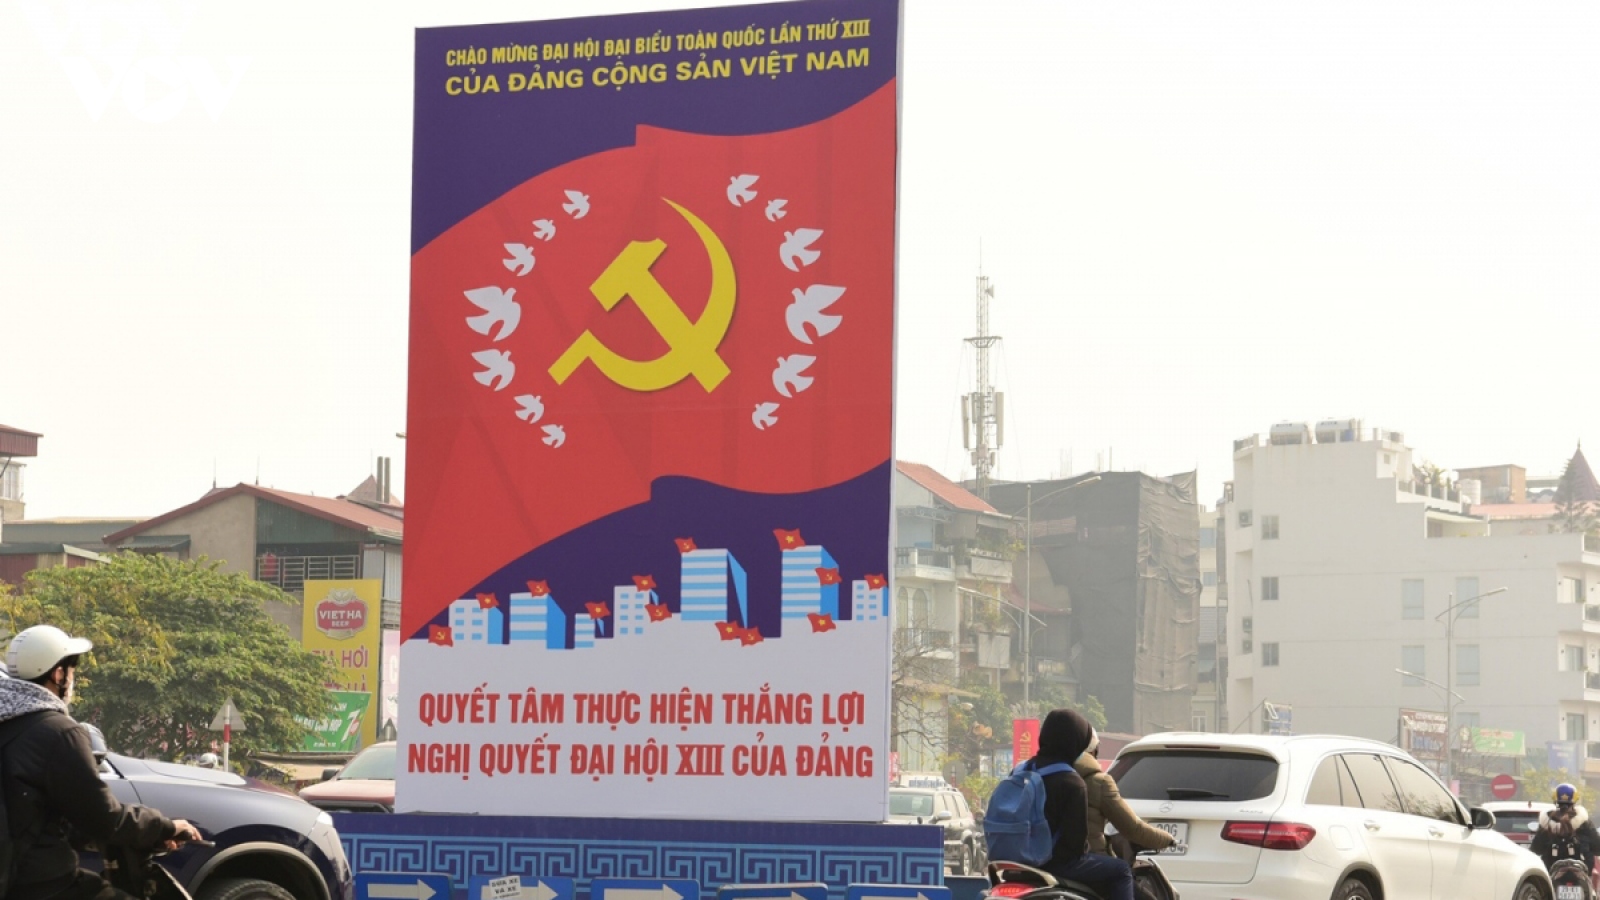 Hanoi radiantly decorated to welcome upcoming National Party Congress